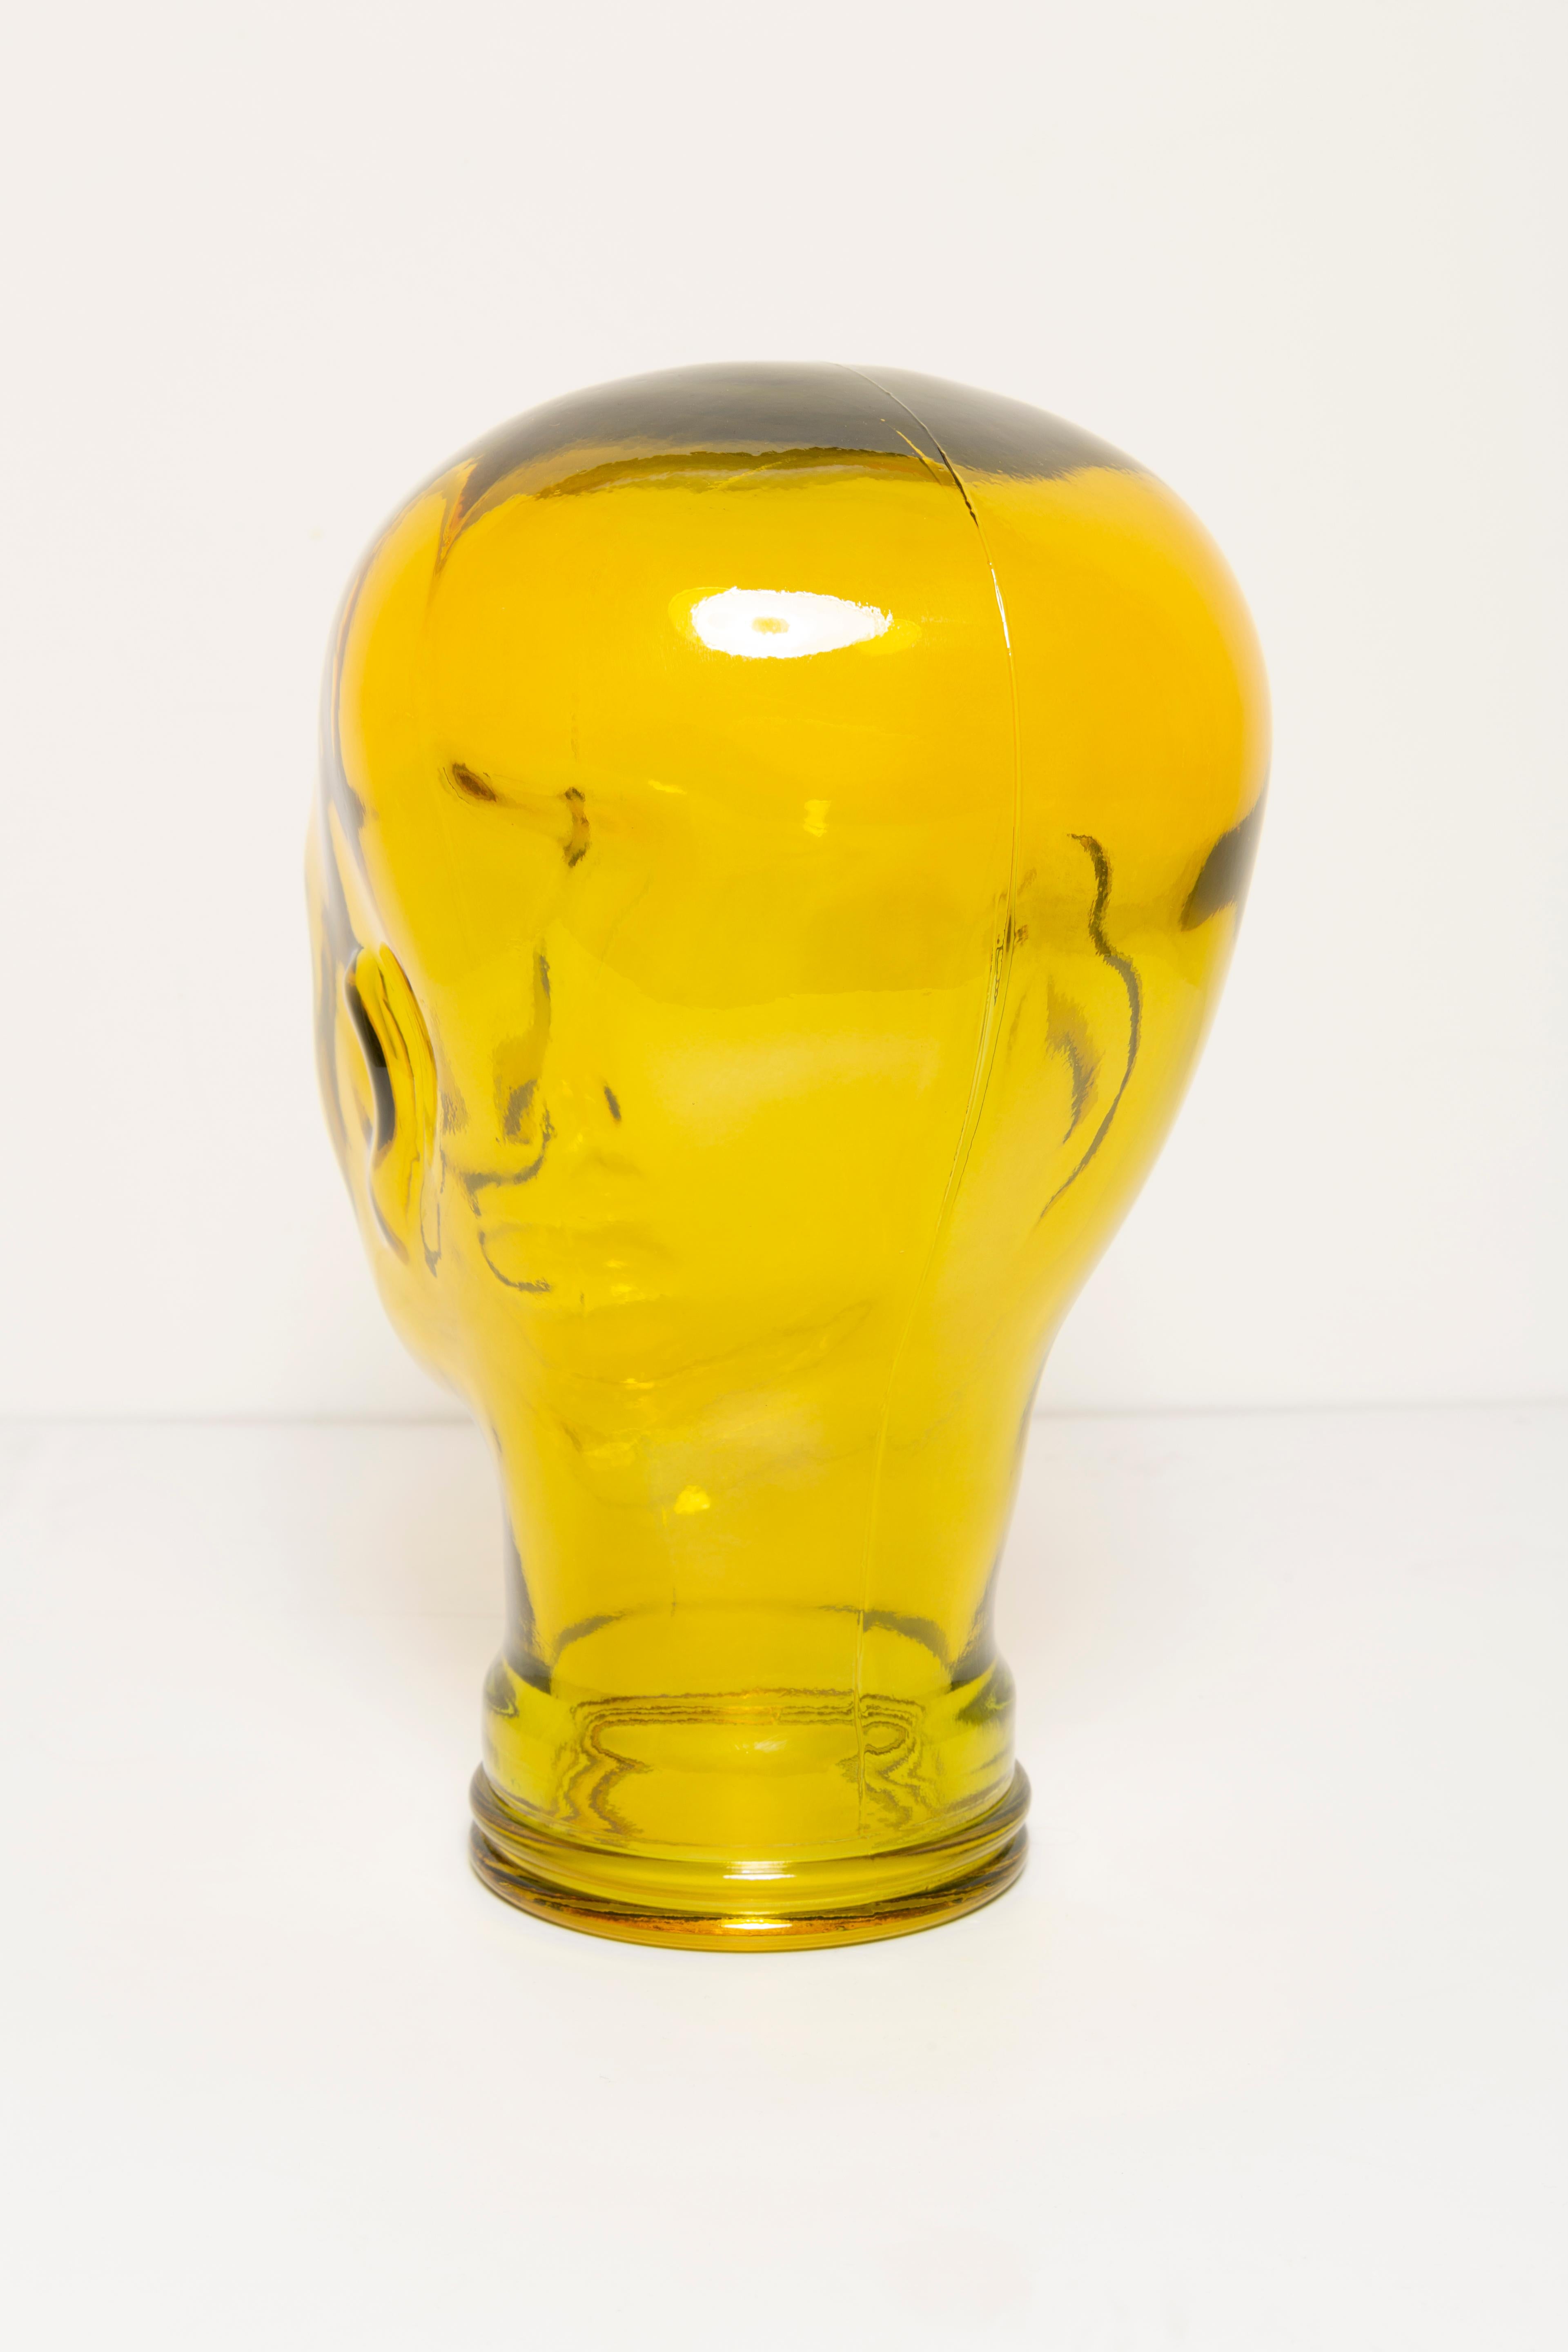 Yellow Vintage Decorative Mannequin Glass Head Sculpture, 1970s, Germany For Sale 4